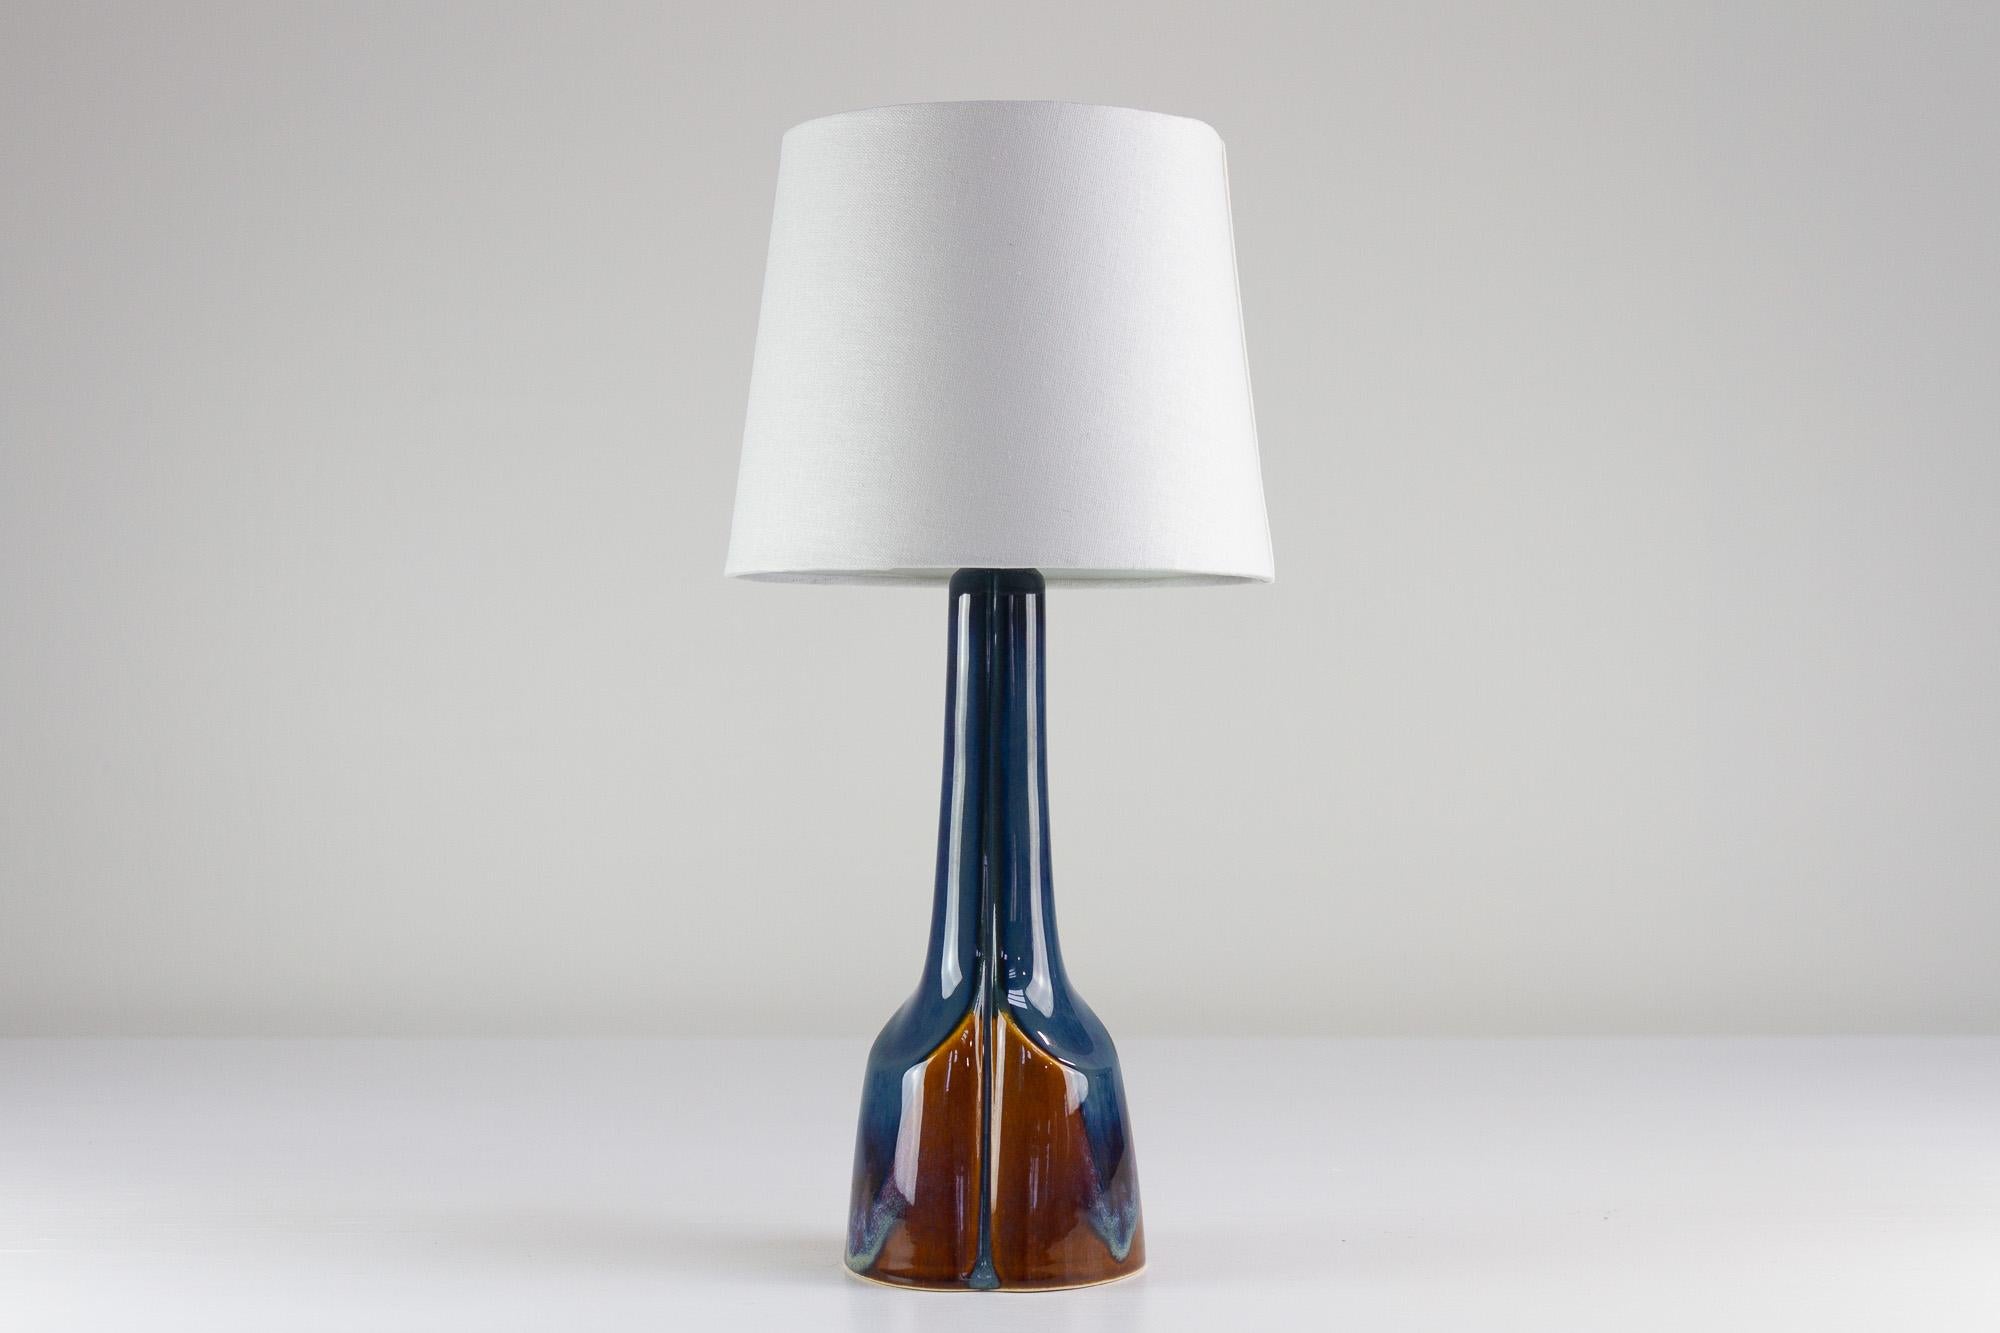 Danish Modern Blue and Brown Ceramic Table Lamp model 940 by E. Johansen for Søholm, 1960s.
Mid-Century Modern Danish blue and brown ceramic table lamp designed by Einar Johansen and handmade by Søholm, Denmark. Soholm is a Danish pottery on the